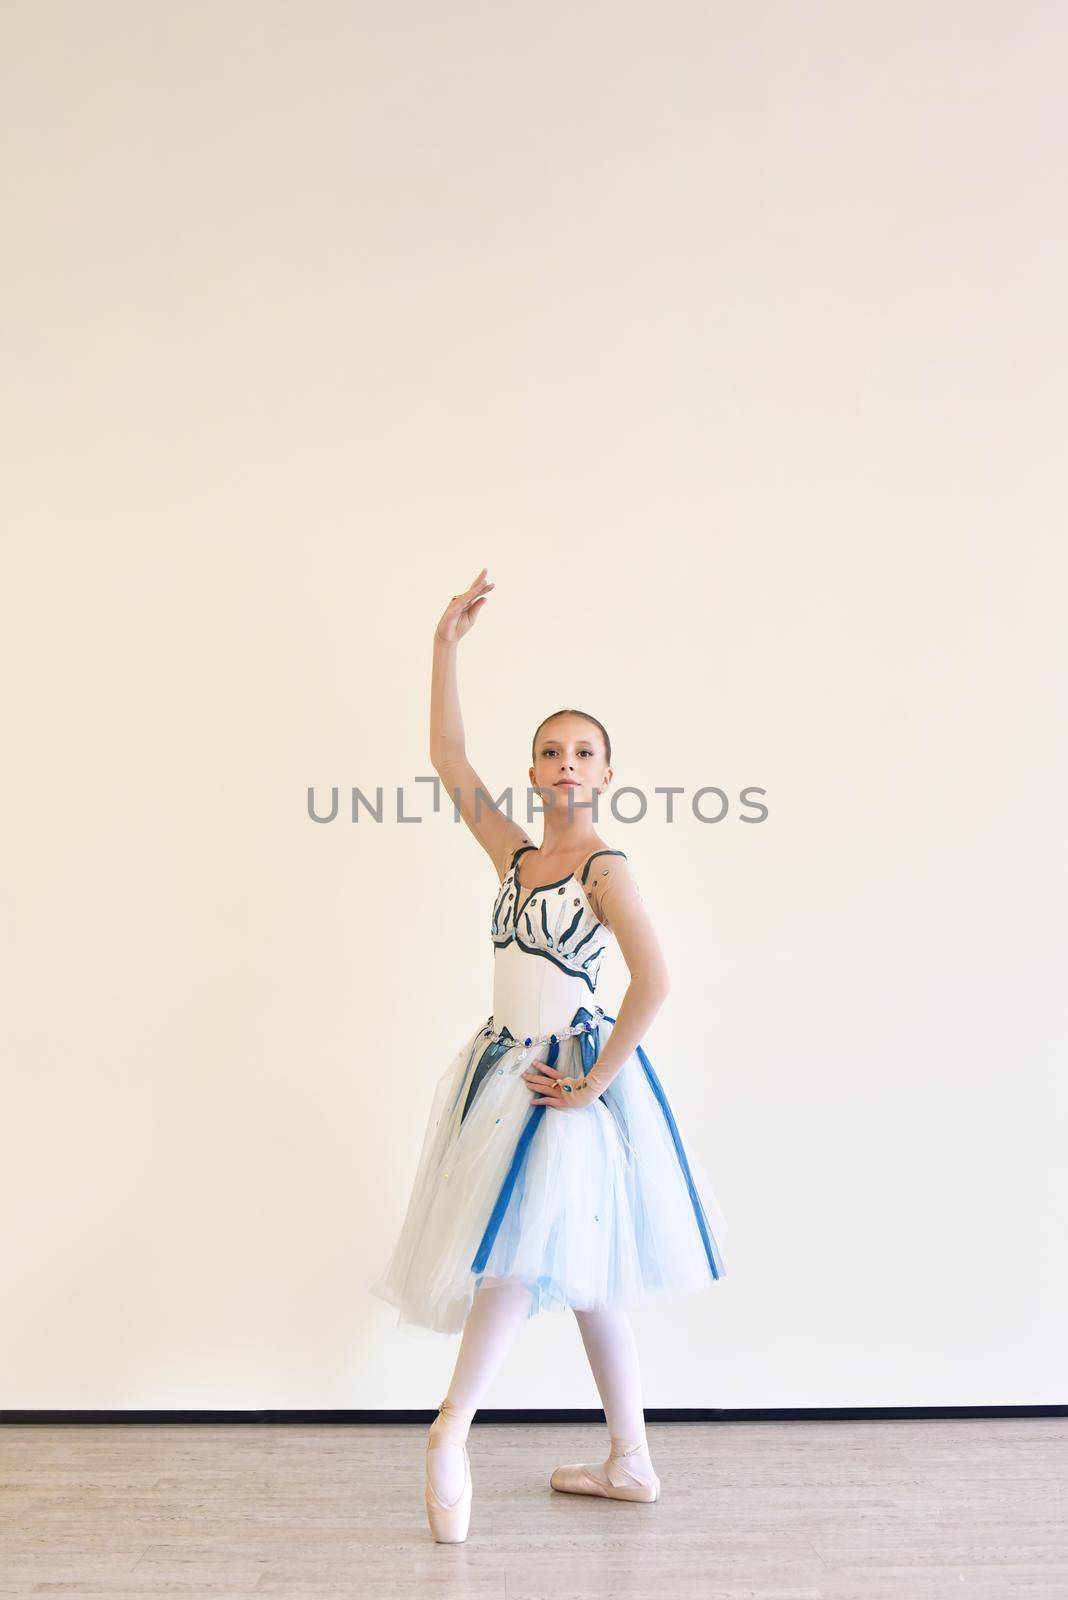 A young charming ballerina in a dress practicing ballet poses in the studio